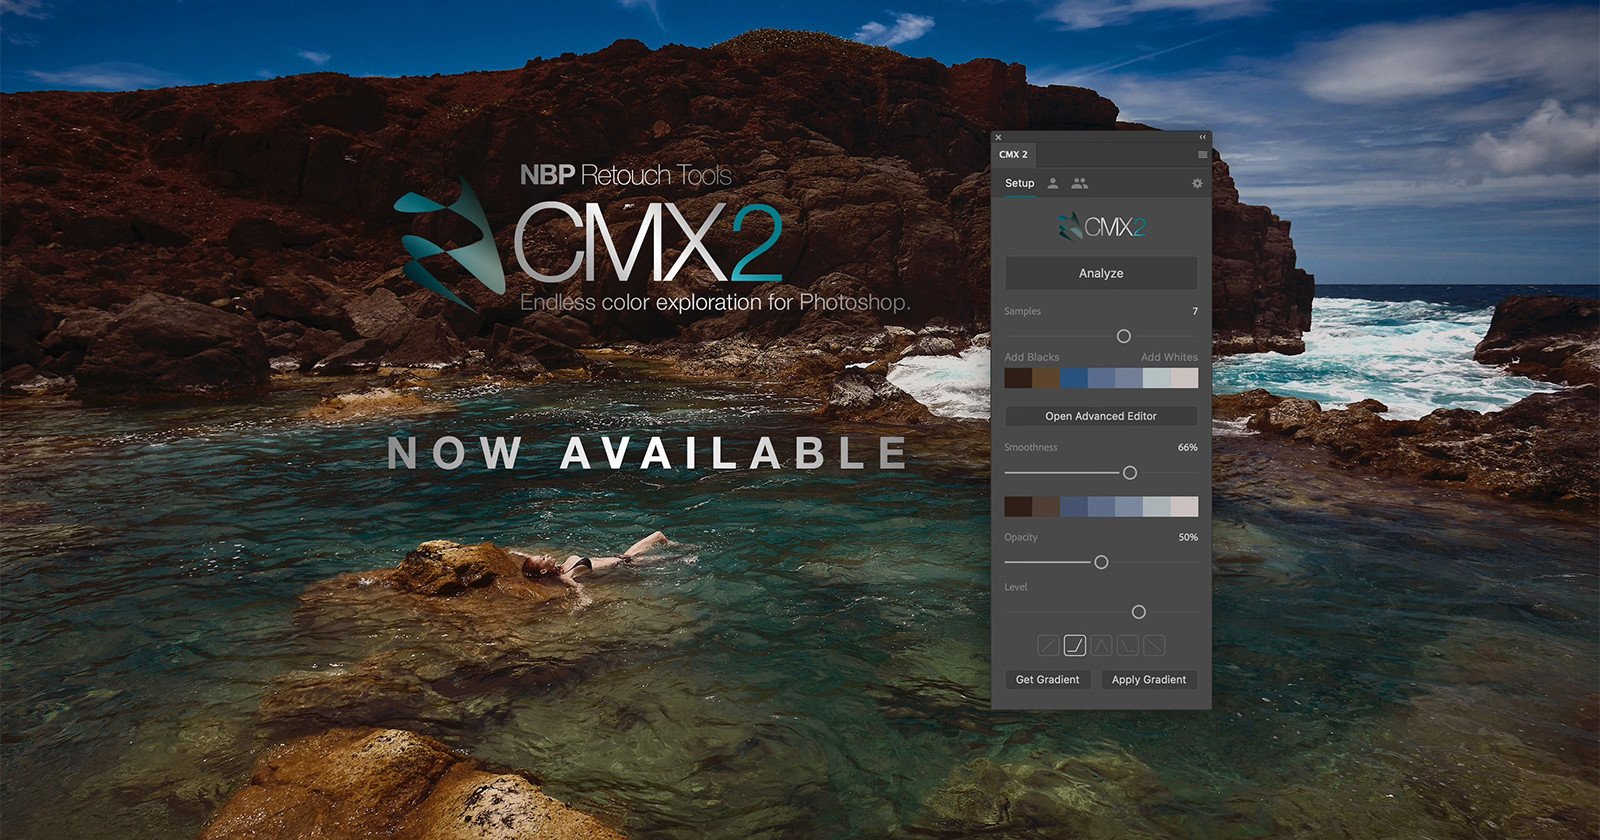 NBP CMX2 Photoshop Plugin Updated, Now Faster and Works on Apple Silicon